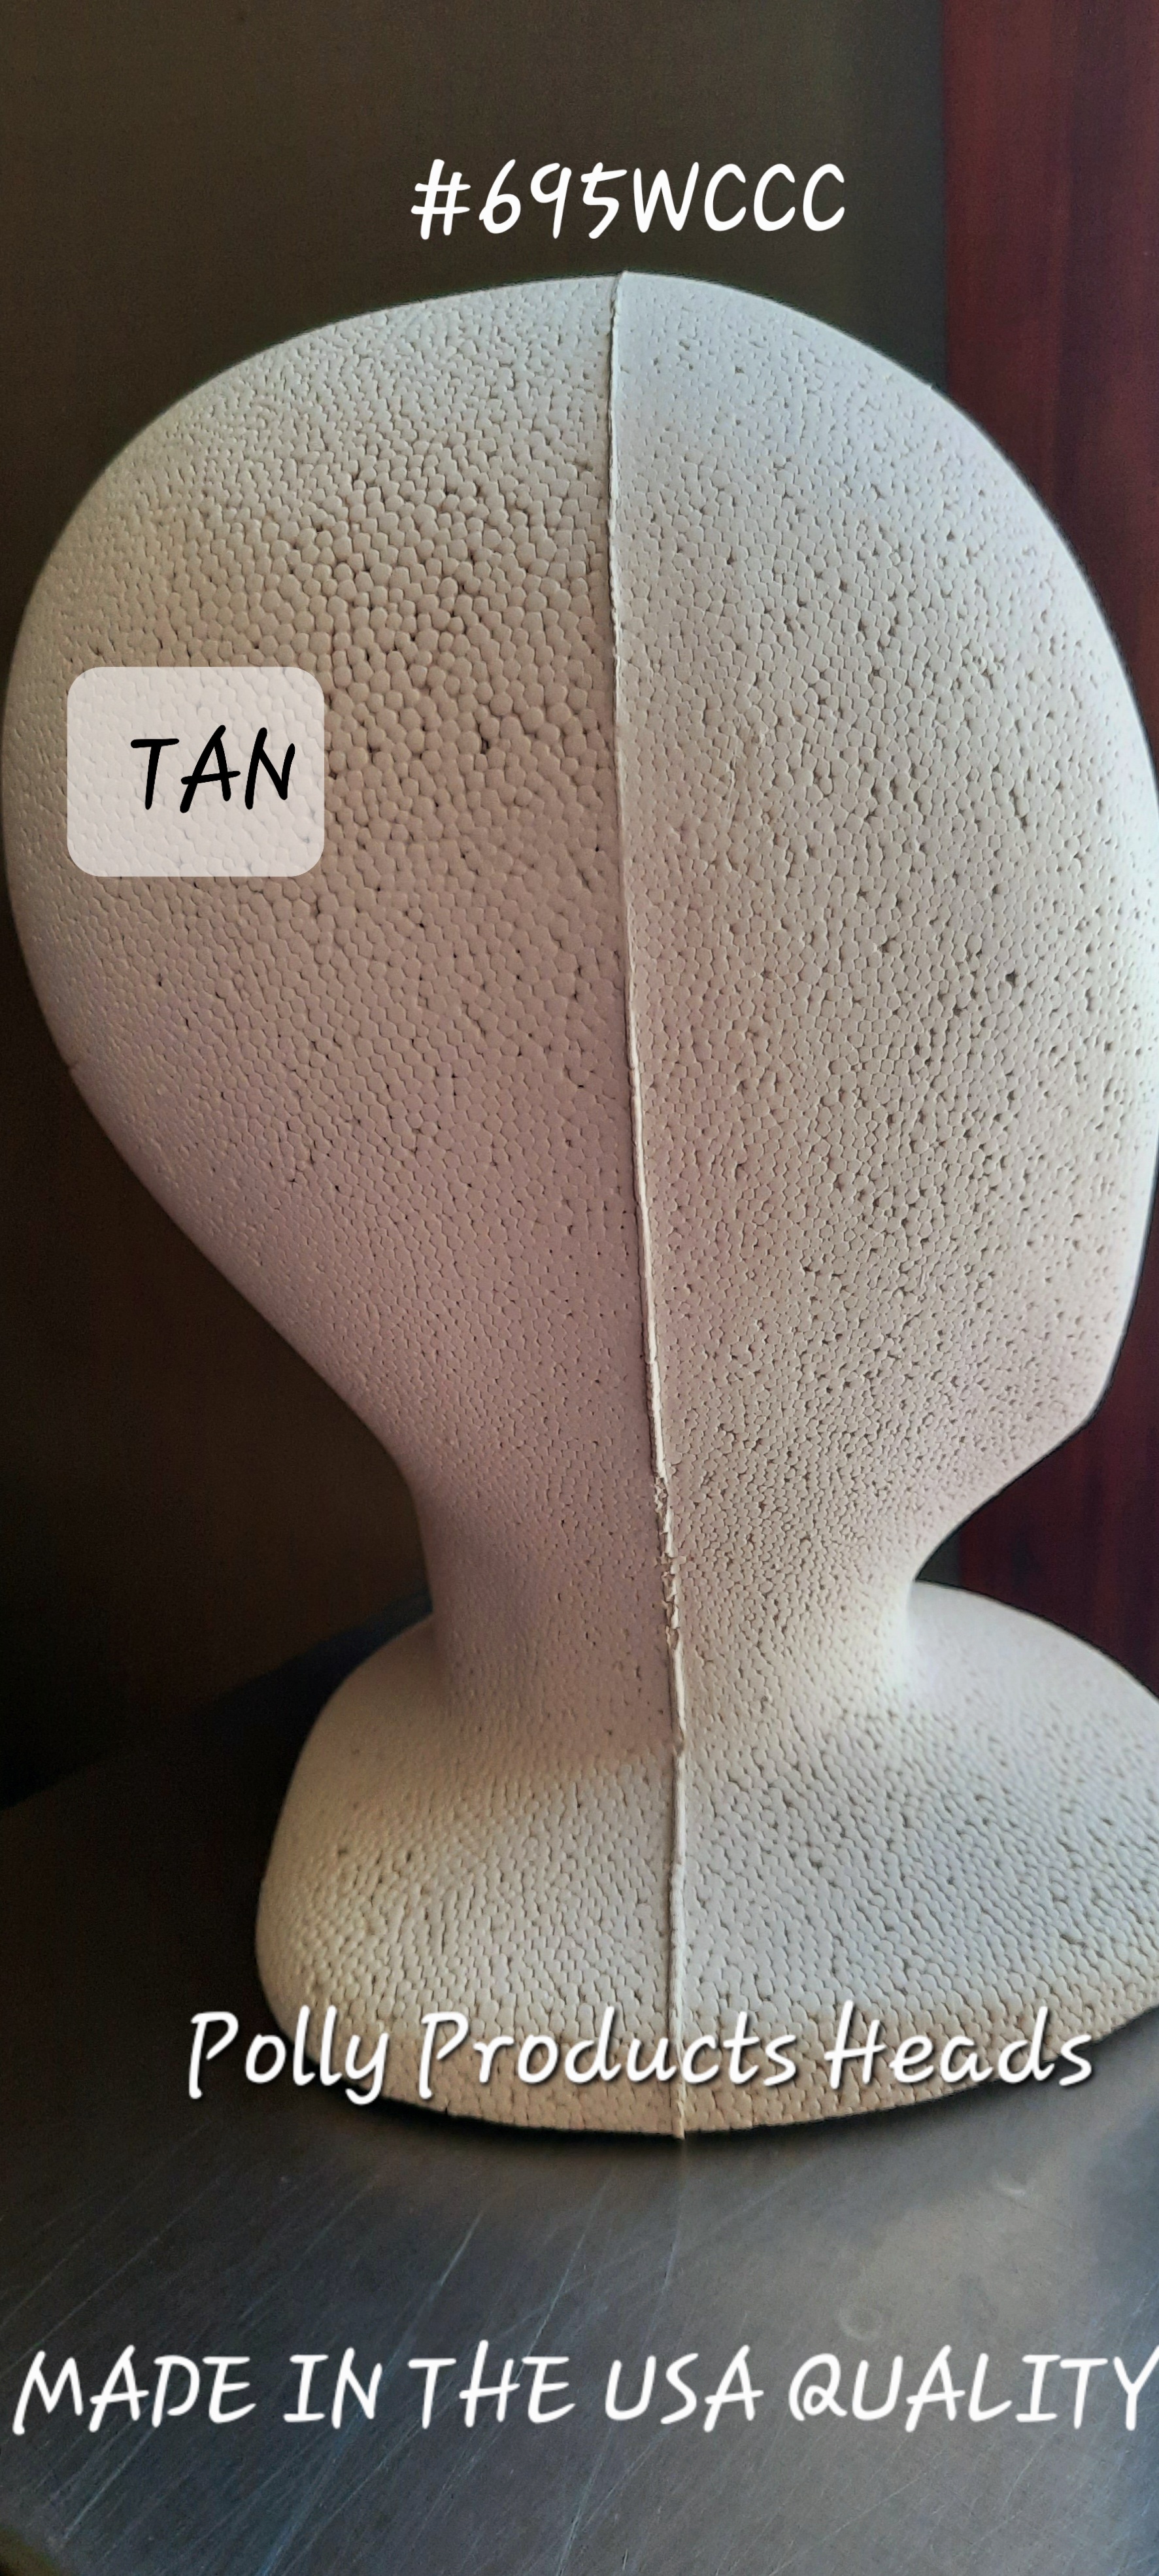 #695WCCC BLANK FACE HEADS BY POLLY PRODUCTS. TAN COLOR-COATED TM. MADE IN THE USA QUALITY 